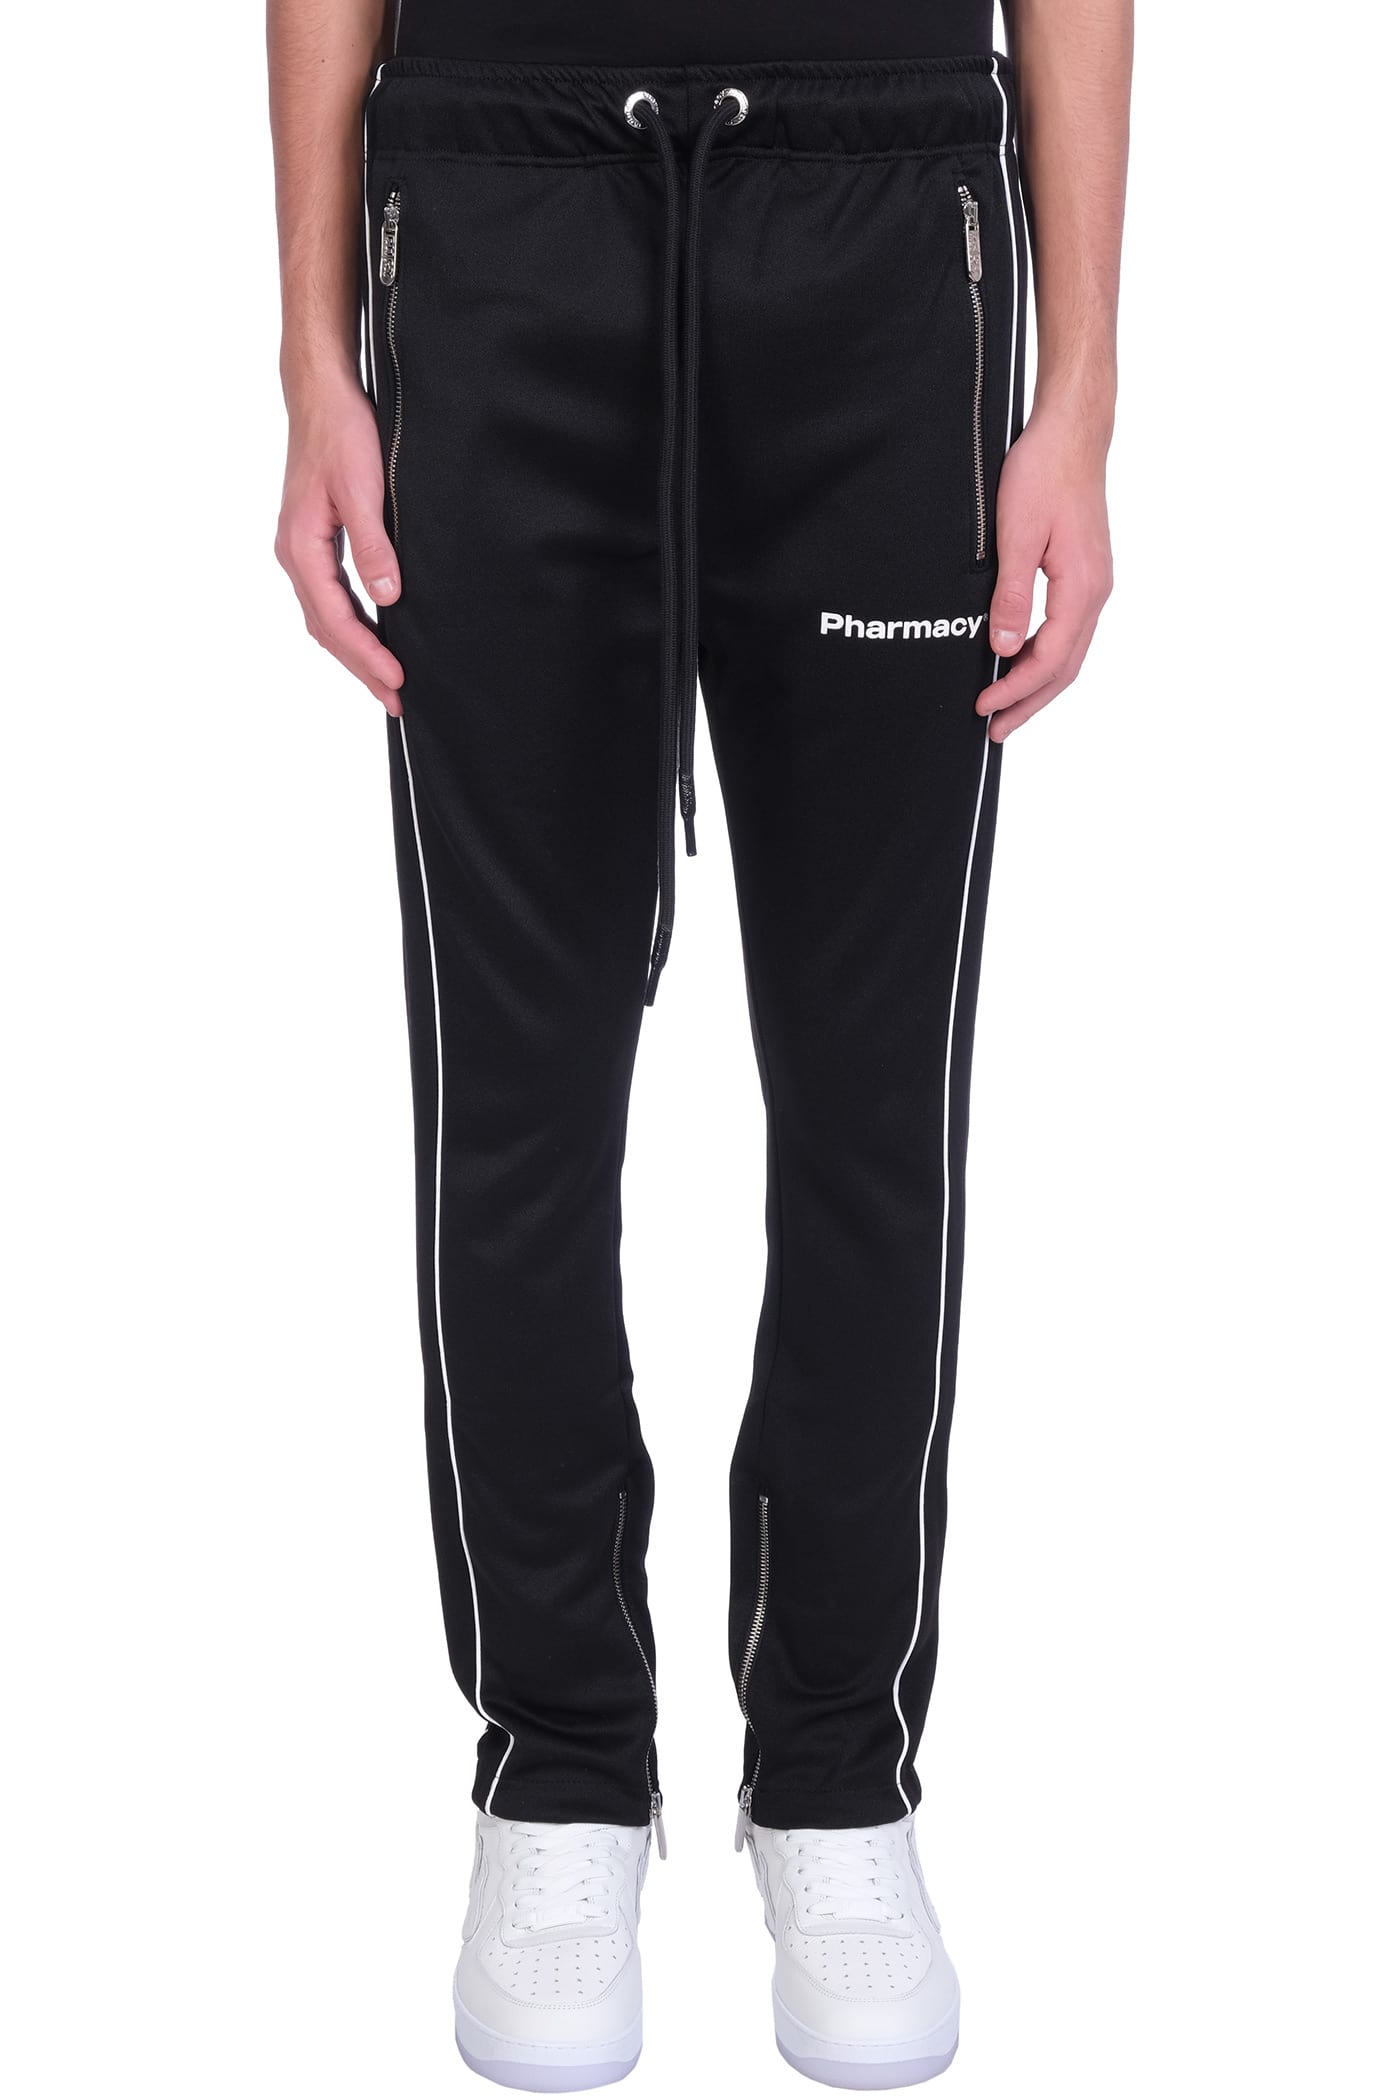 Pharmacy Industry Pants In Black Polyester